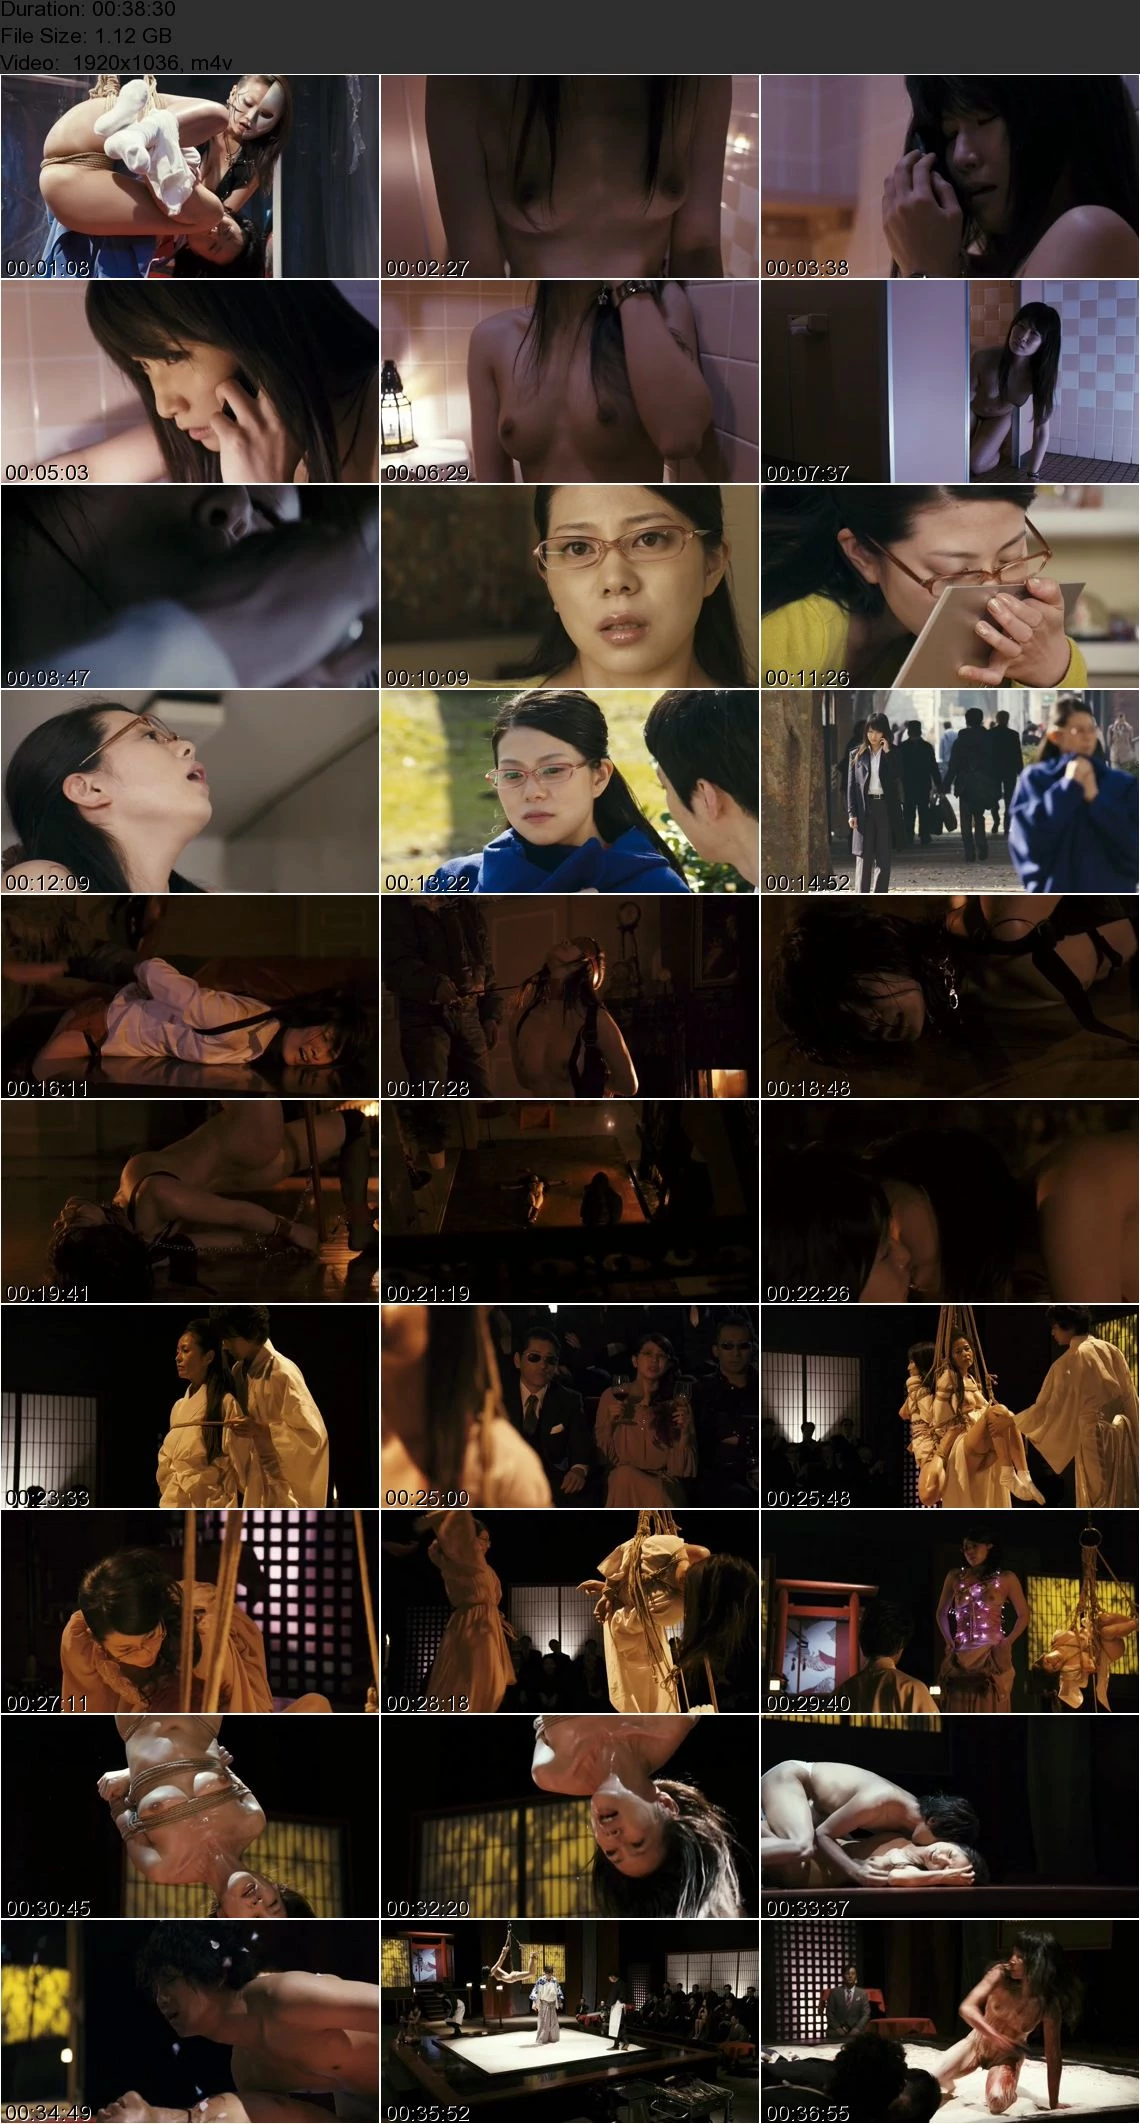 Sexual torture and mother son incest in Japan drama Hana to hebi Zero (2014) photo pic